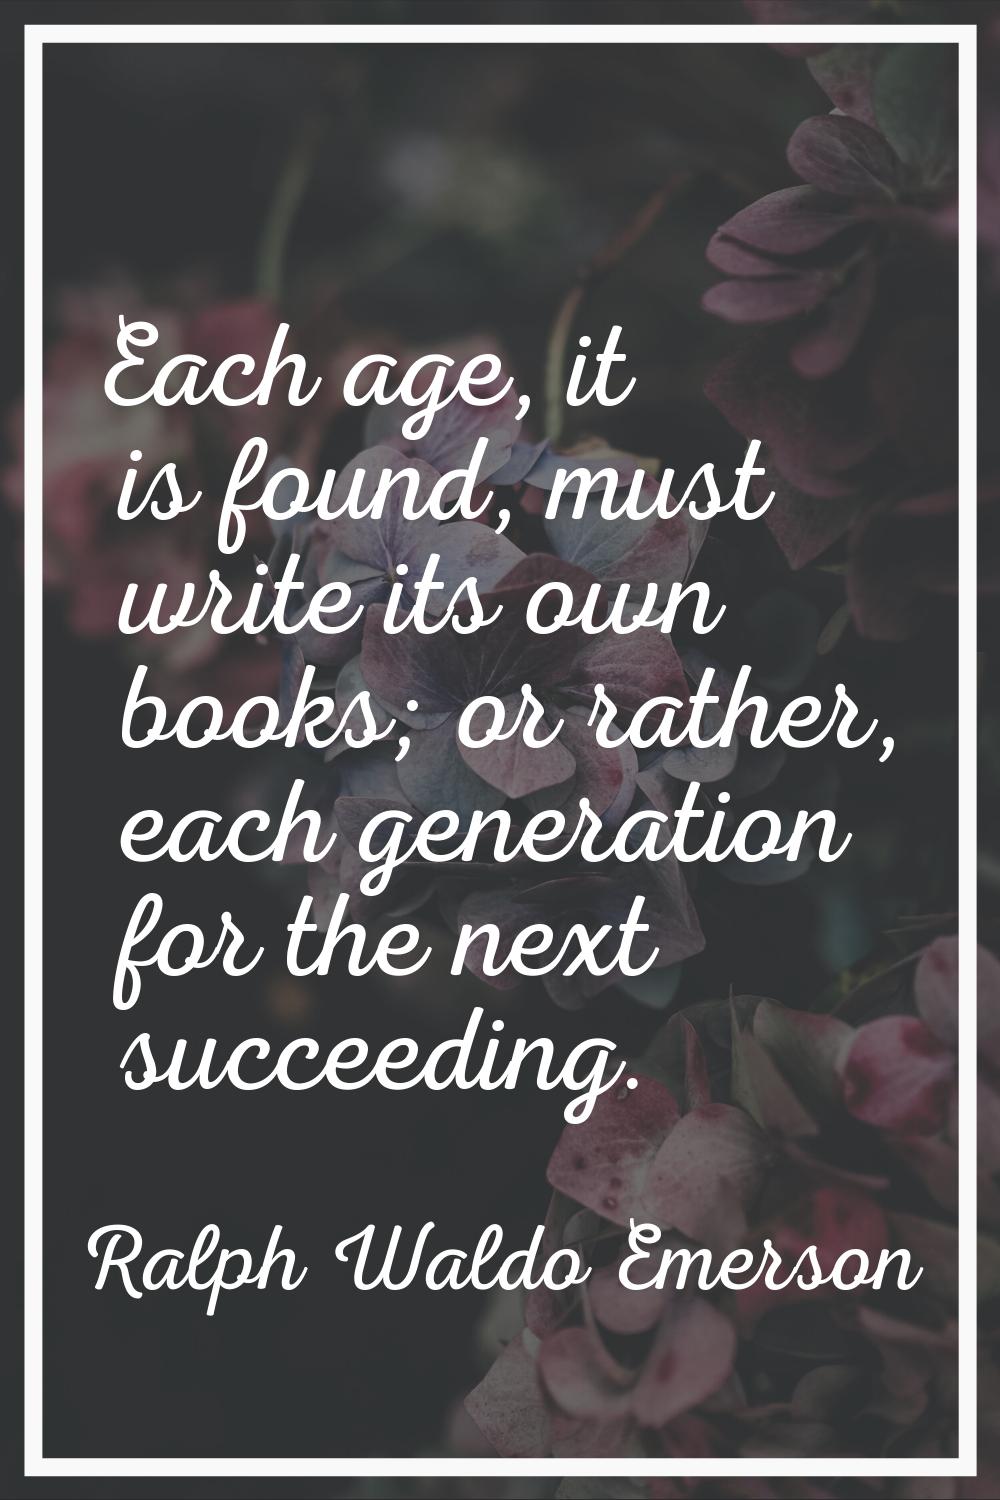 Each age, it is found, must write its own books; or rather, each generation for the next succeeding